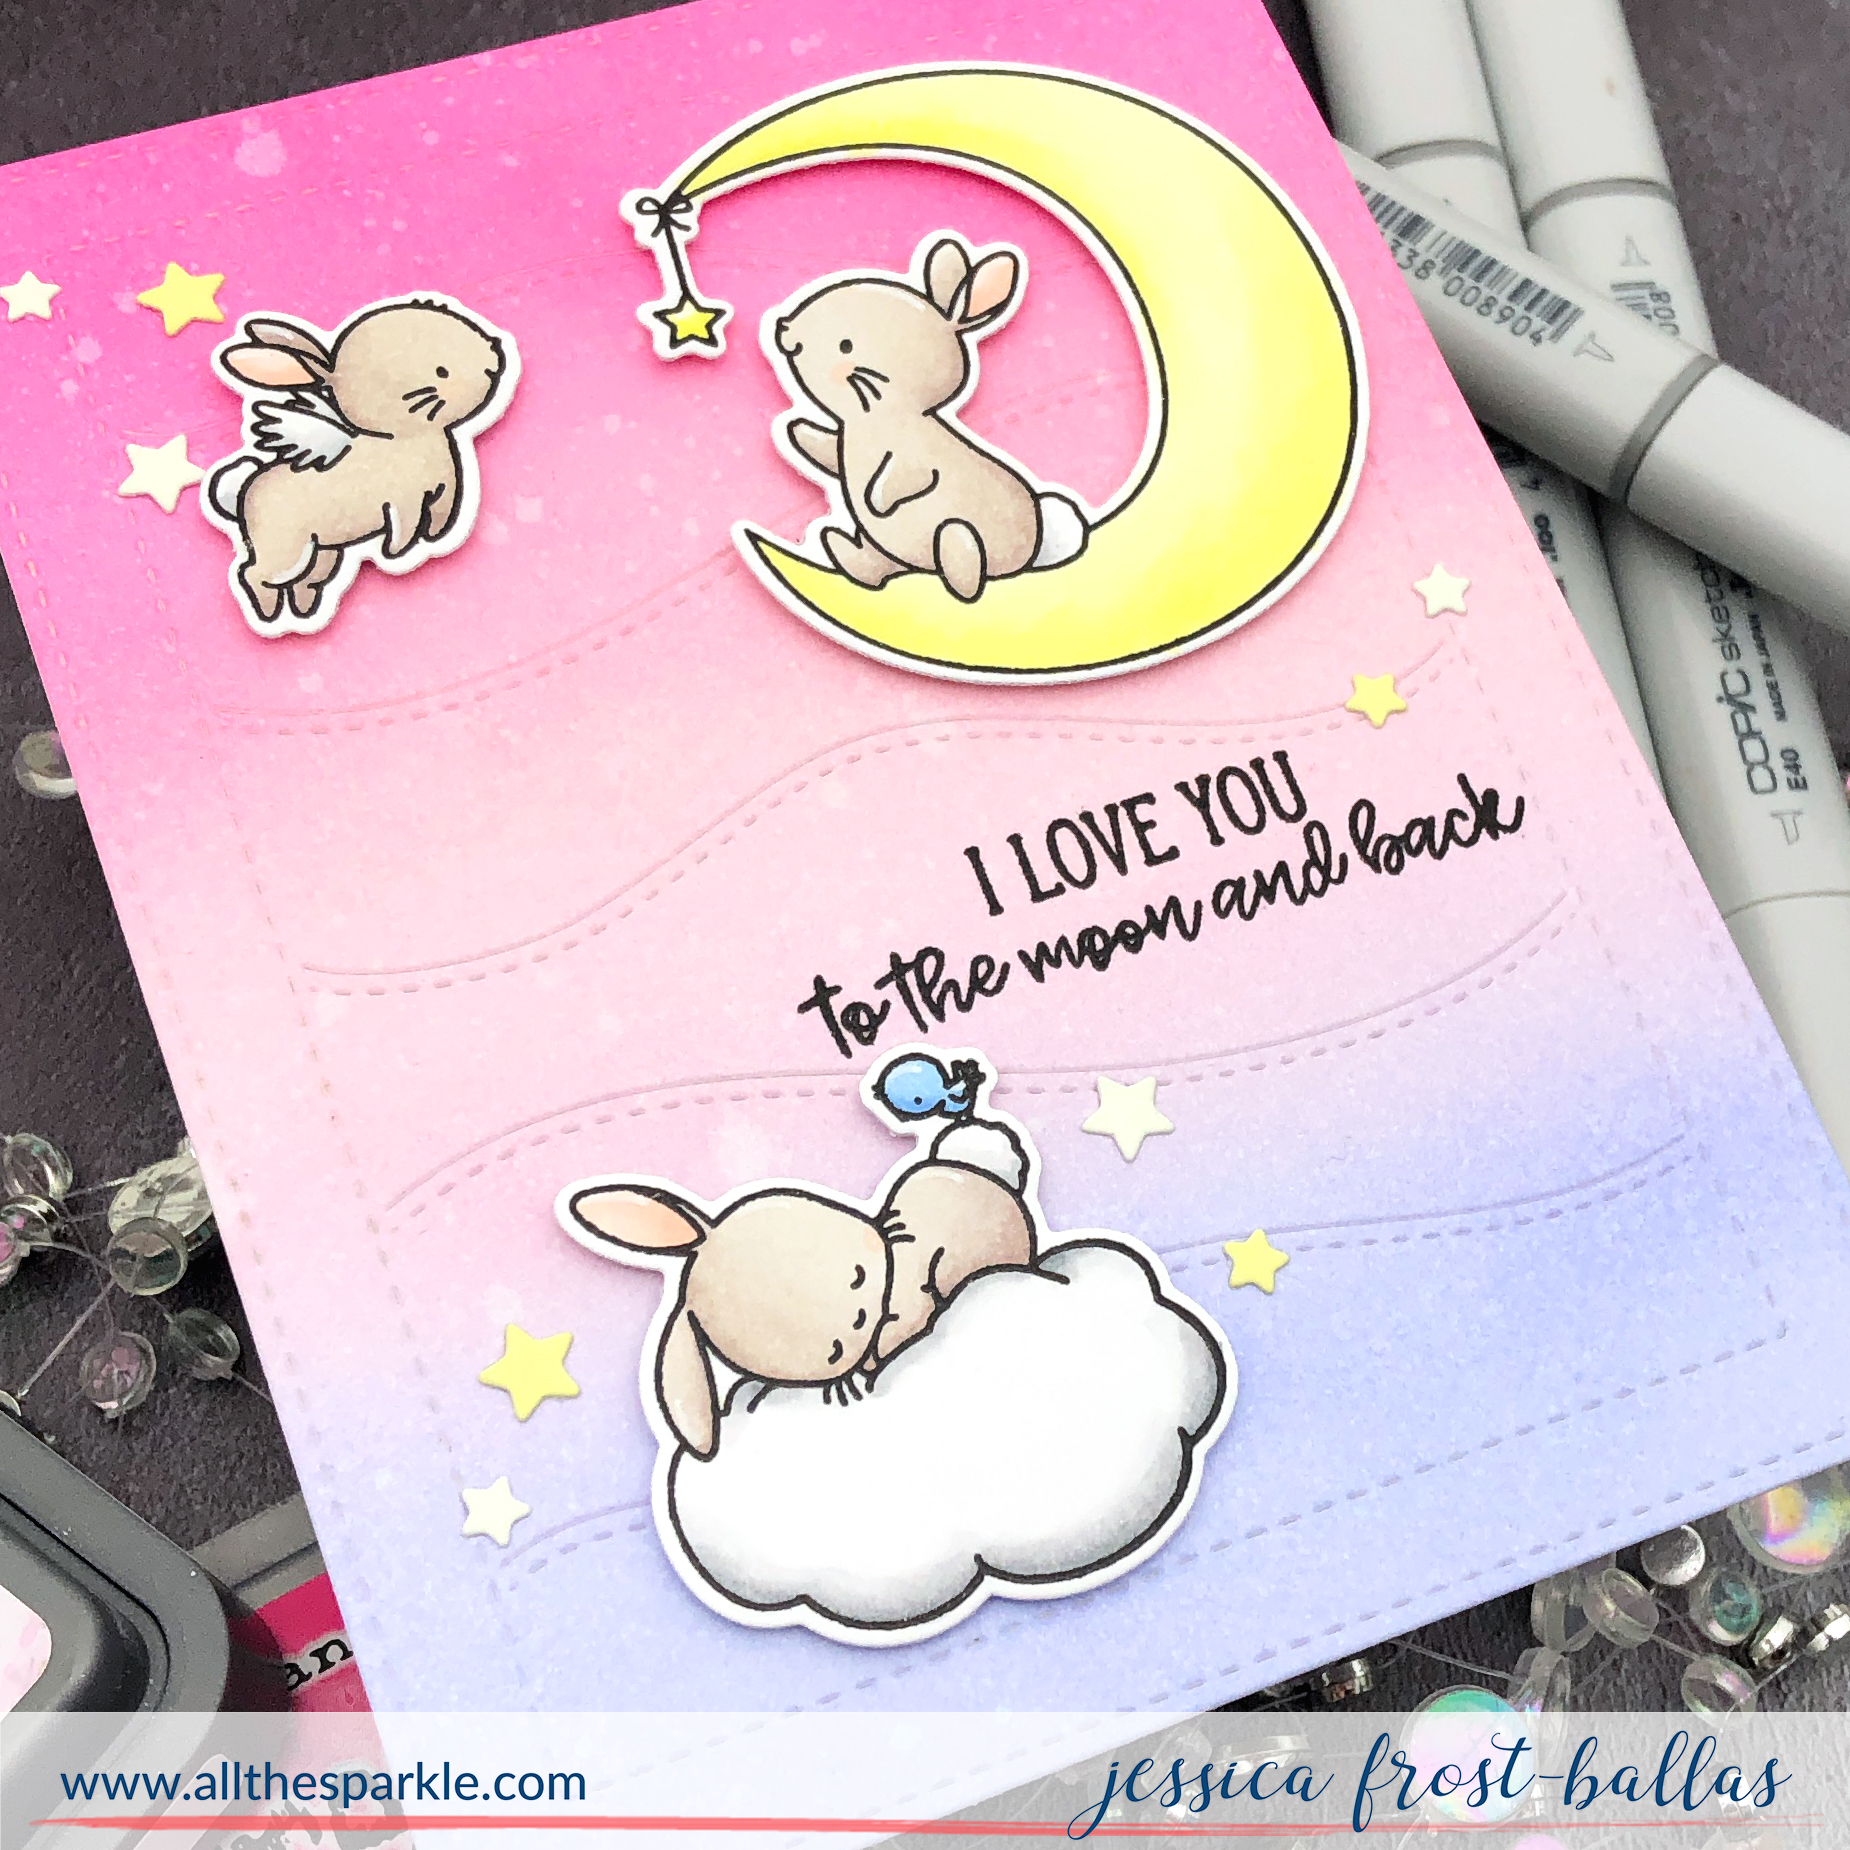 Wish Upon a Star by Jessica Frost-Ballas for Simon Says Stamp